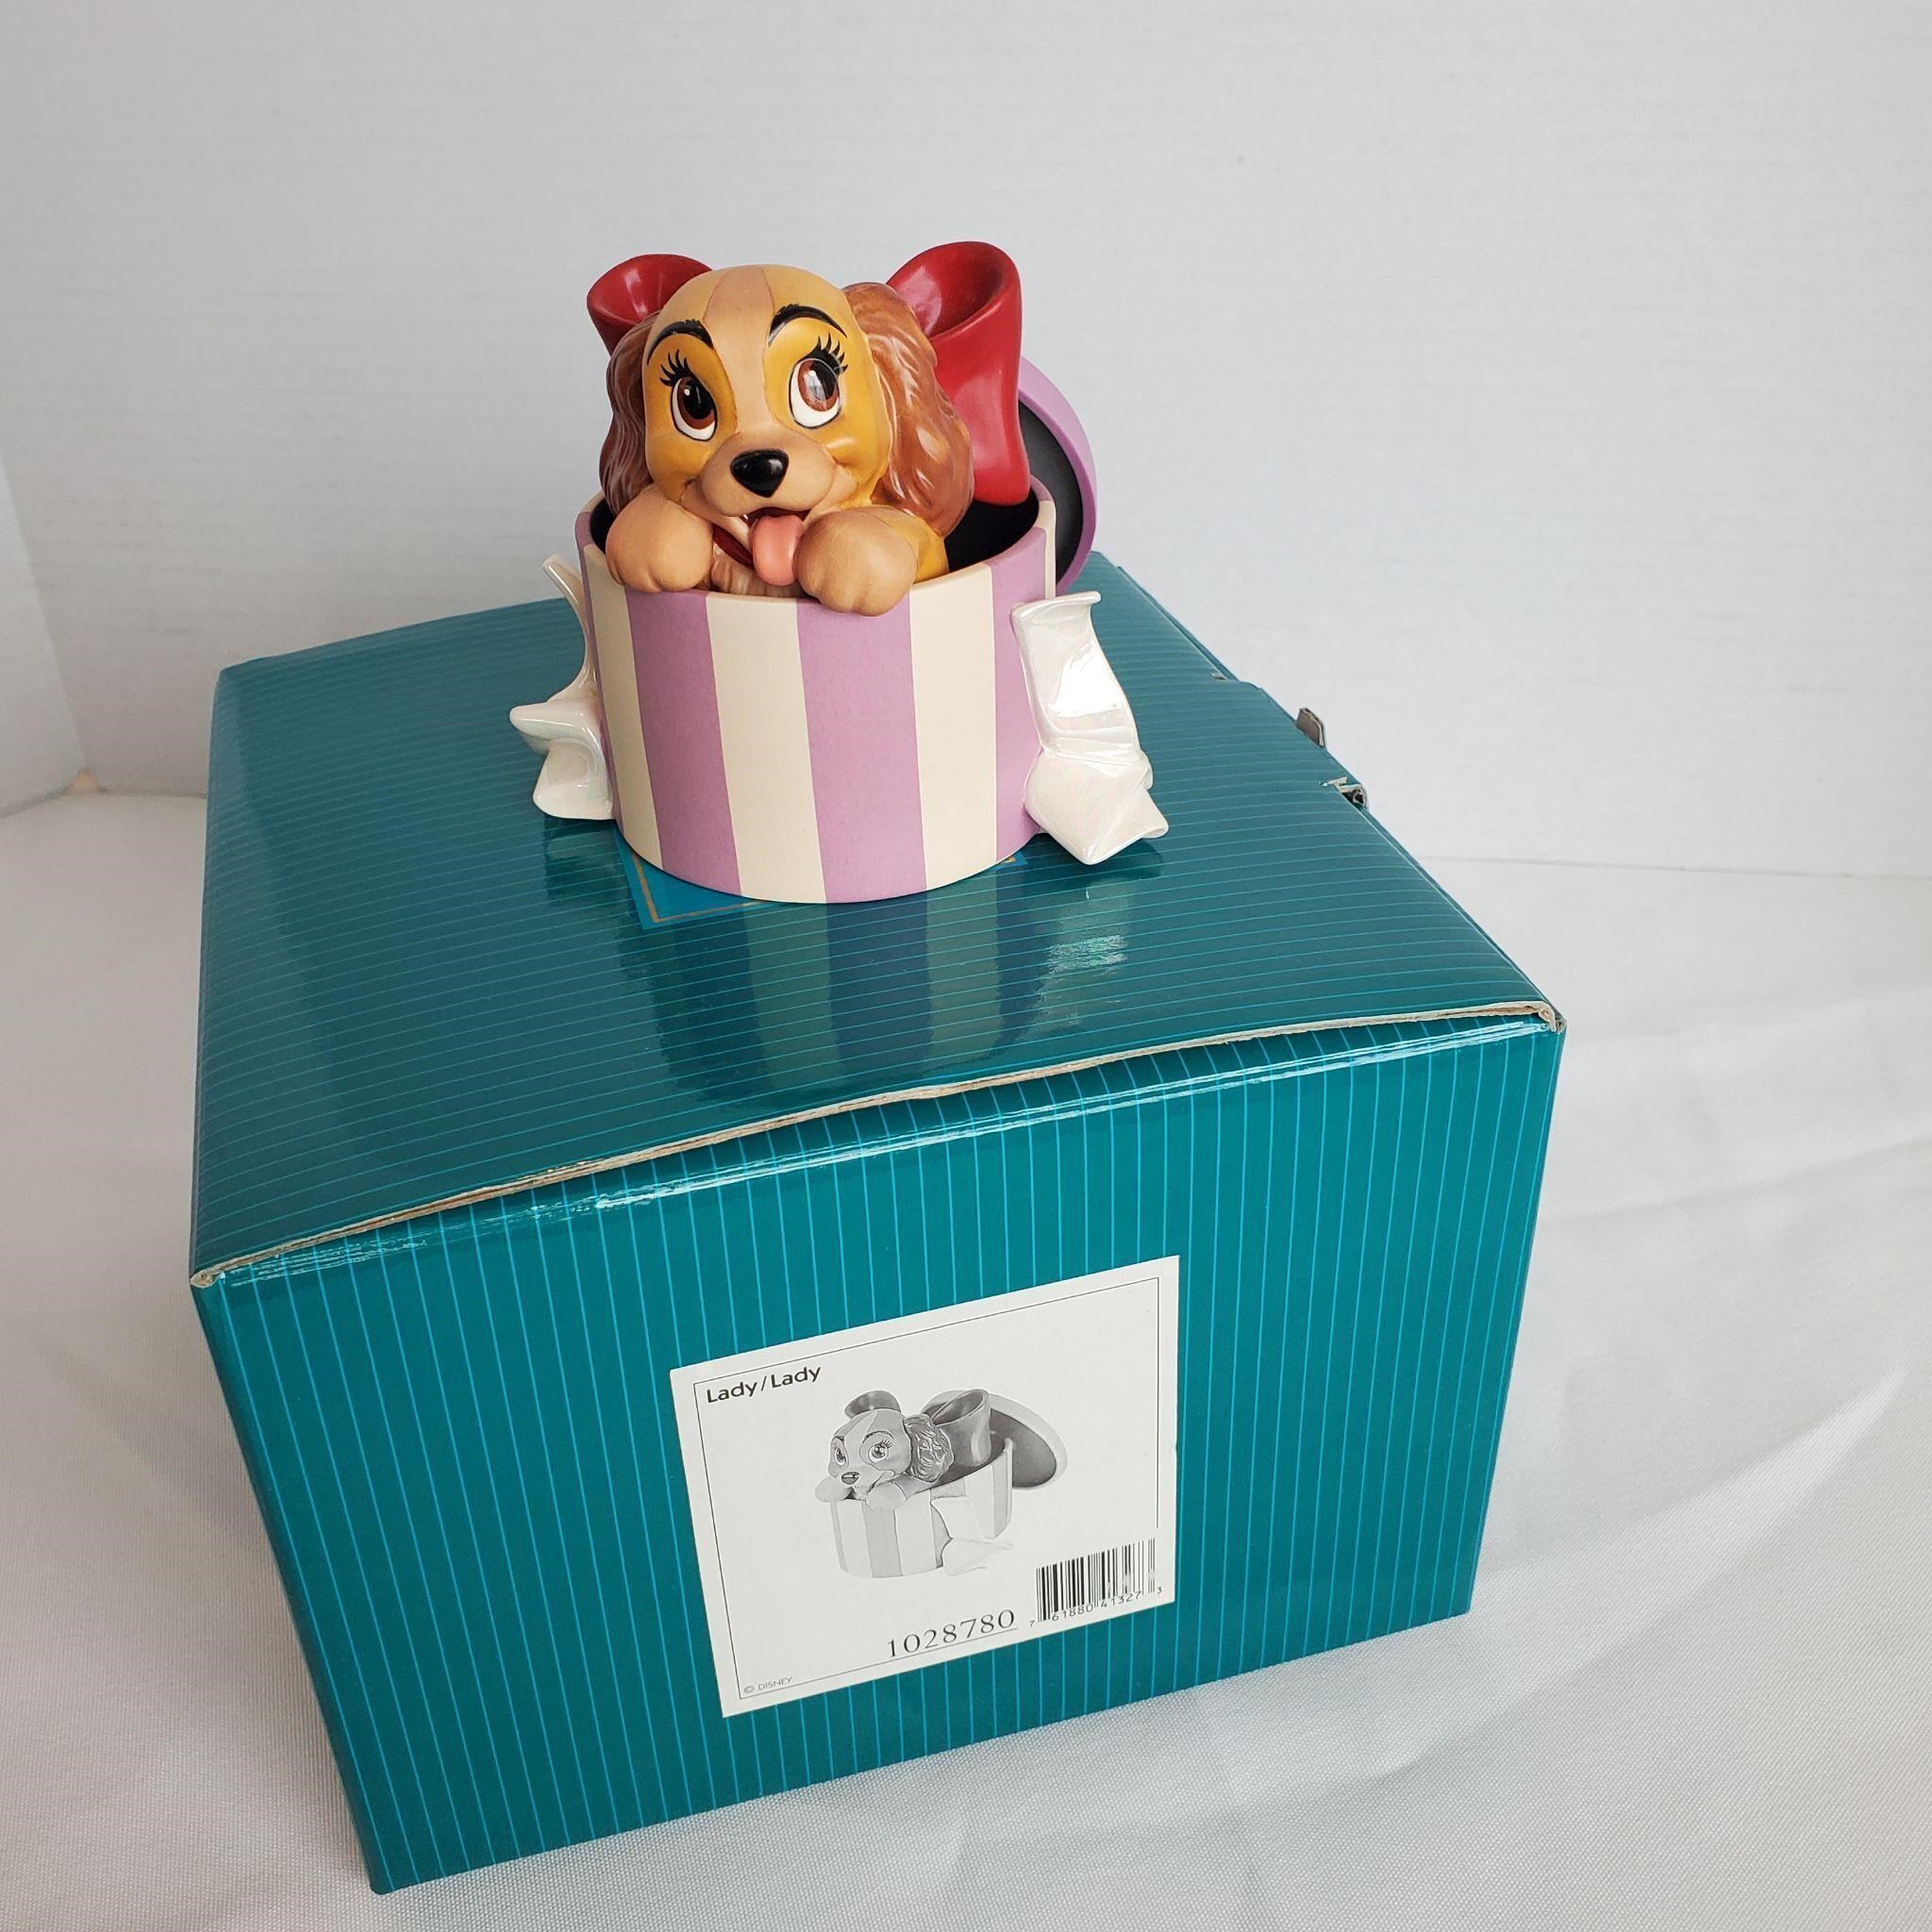 Disney Lady and the Tramp Puppy Collectible